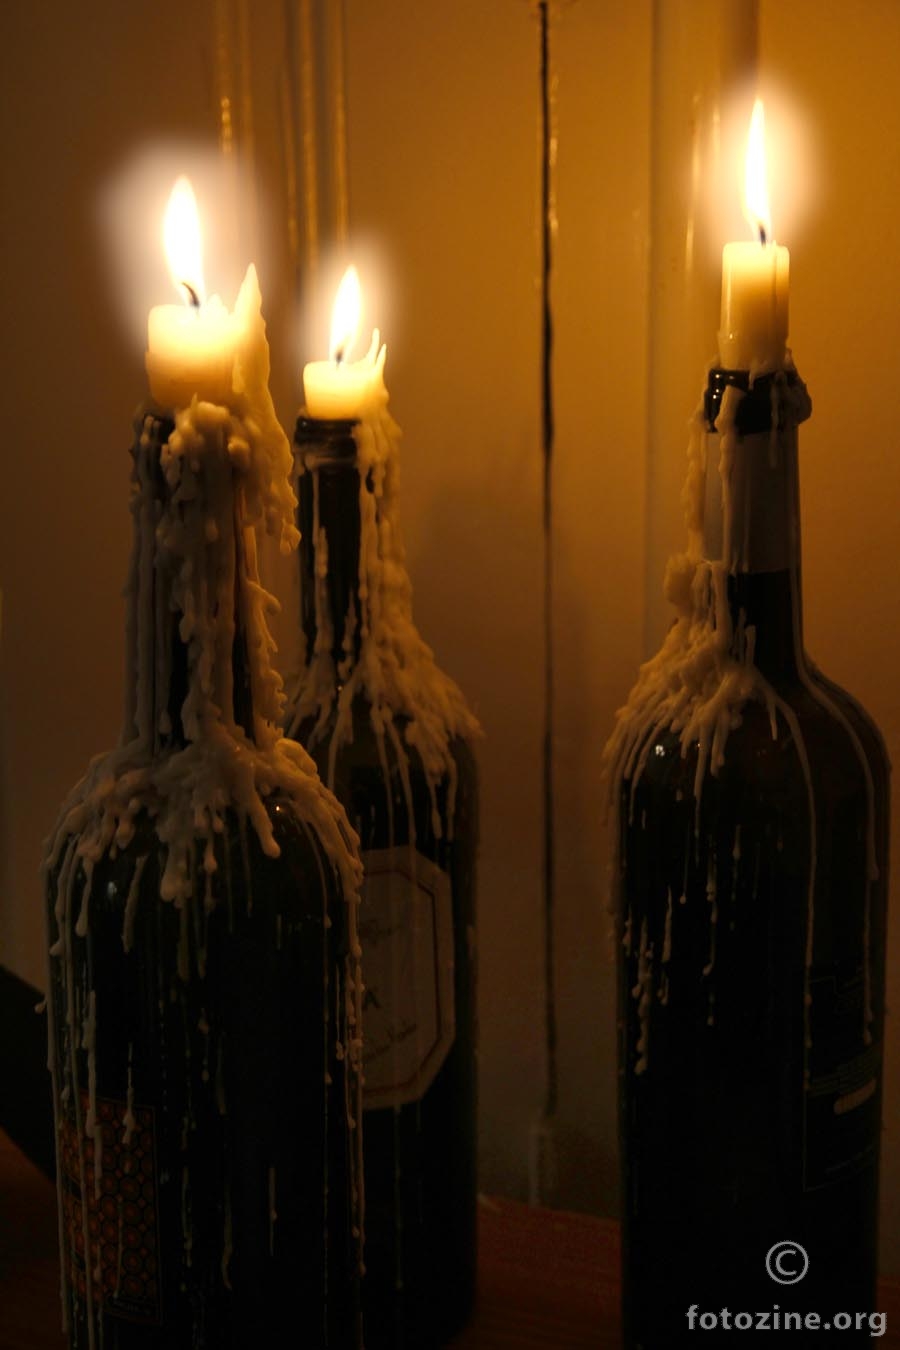 Candles and wine...